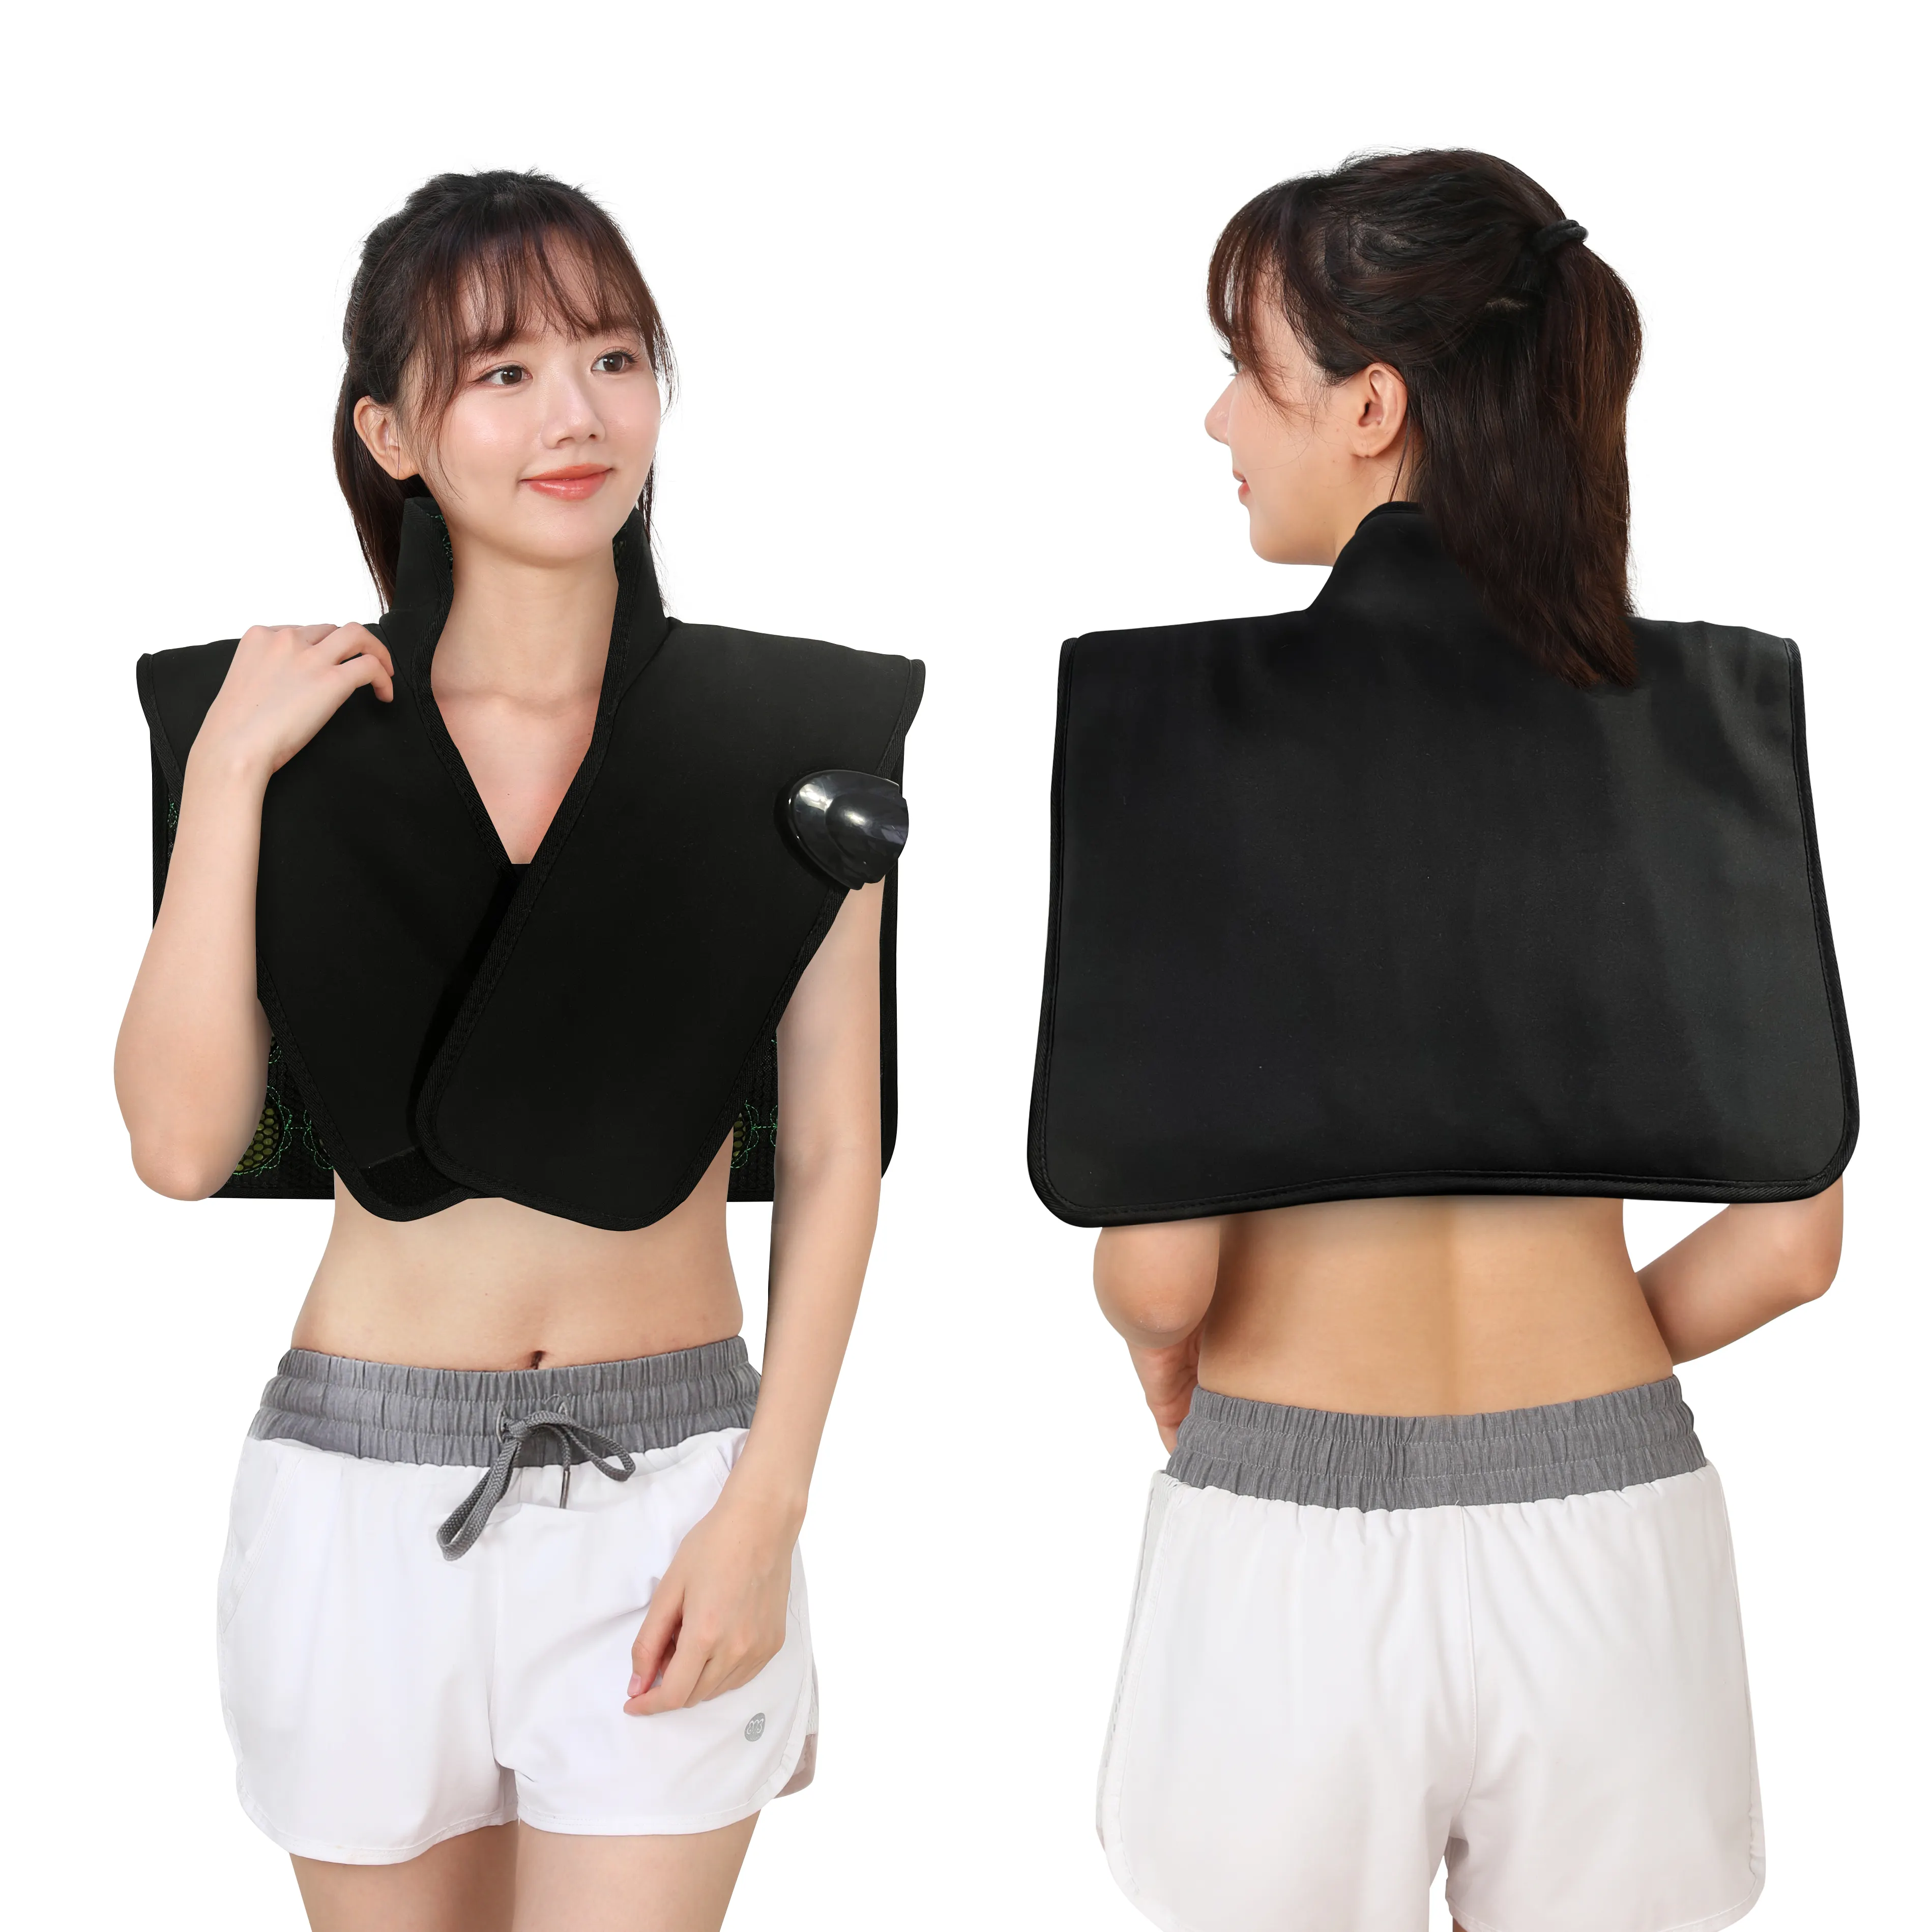 Beauty Products For Women Portable Sauna Heater Cape For Sale With Jade Stone Carbon Fiber Pemf Magnetic Therapy Device Machine